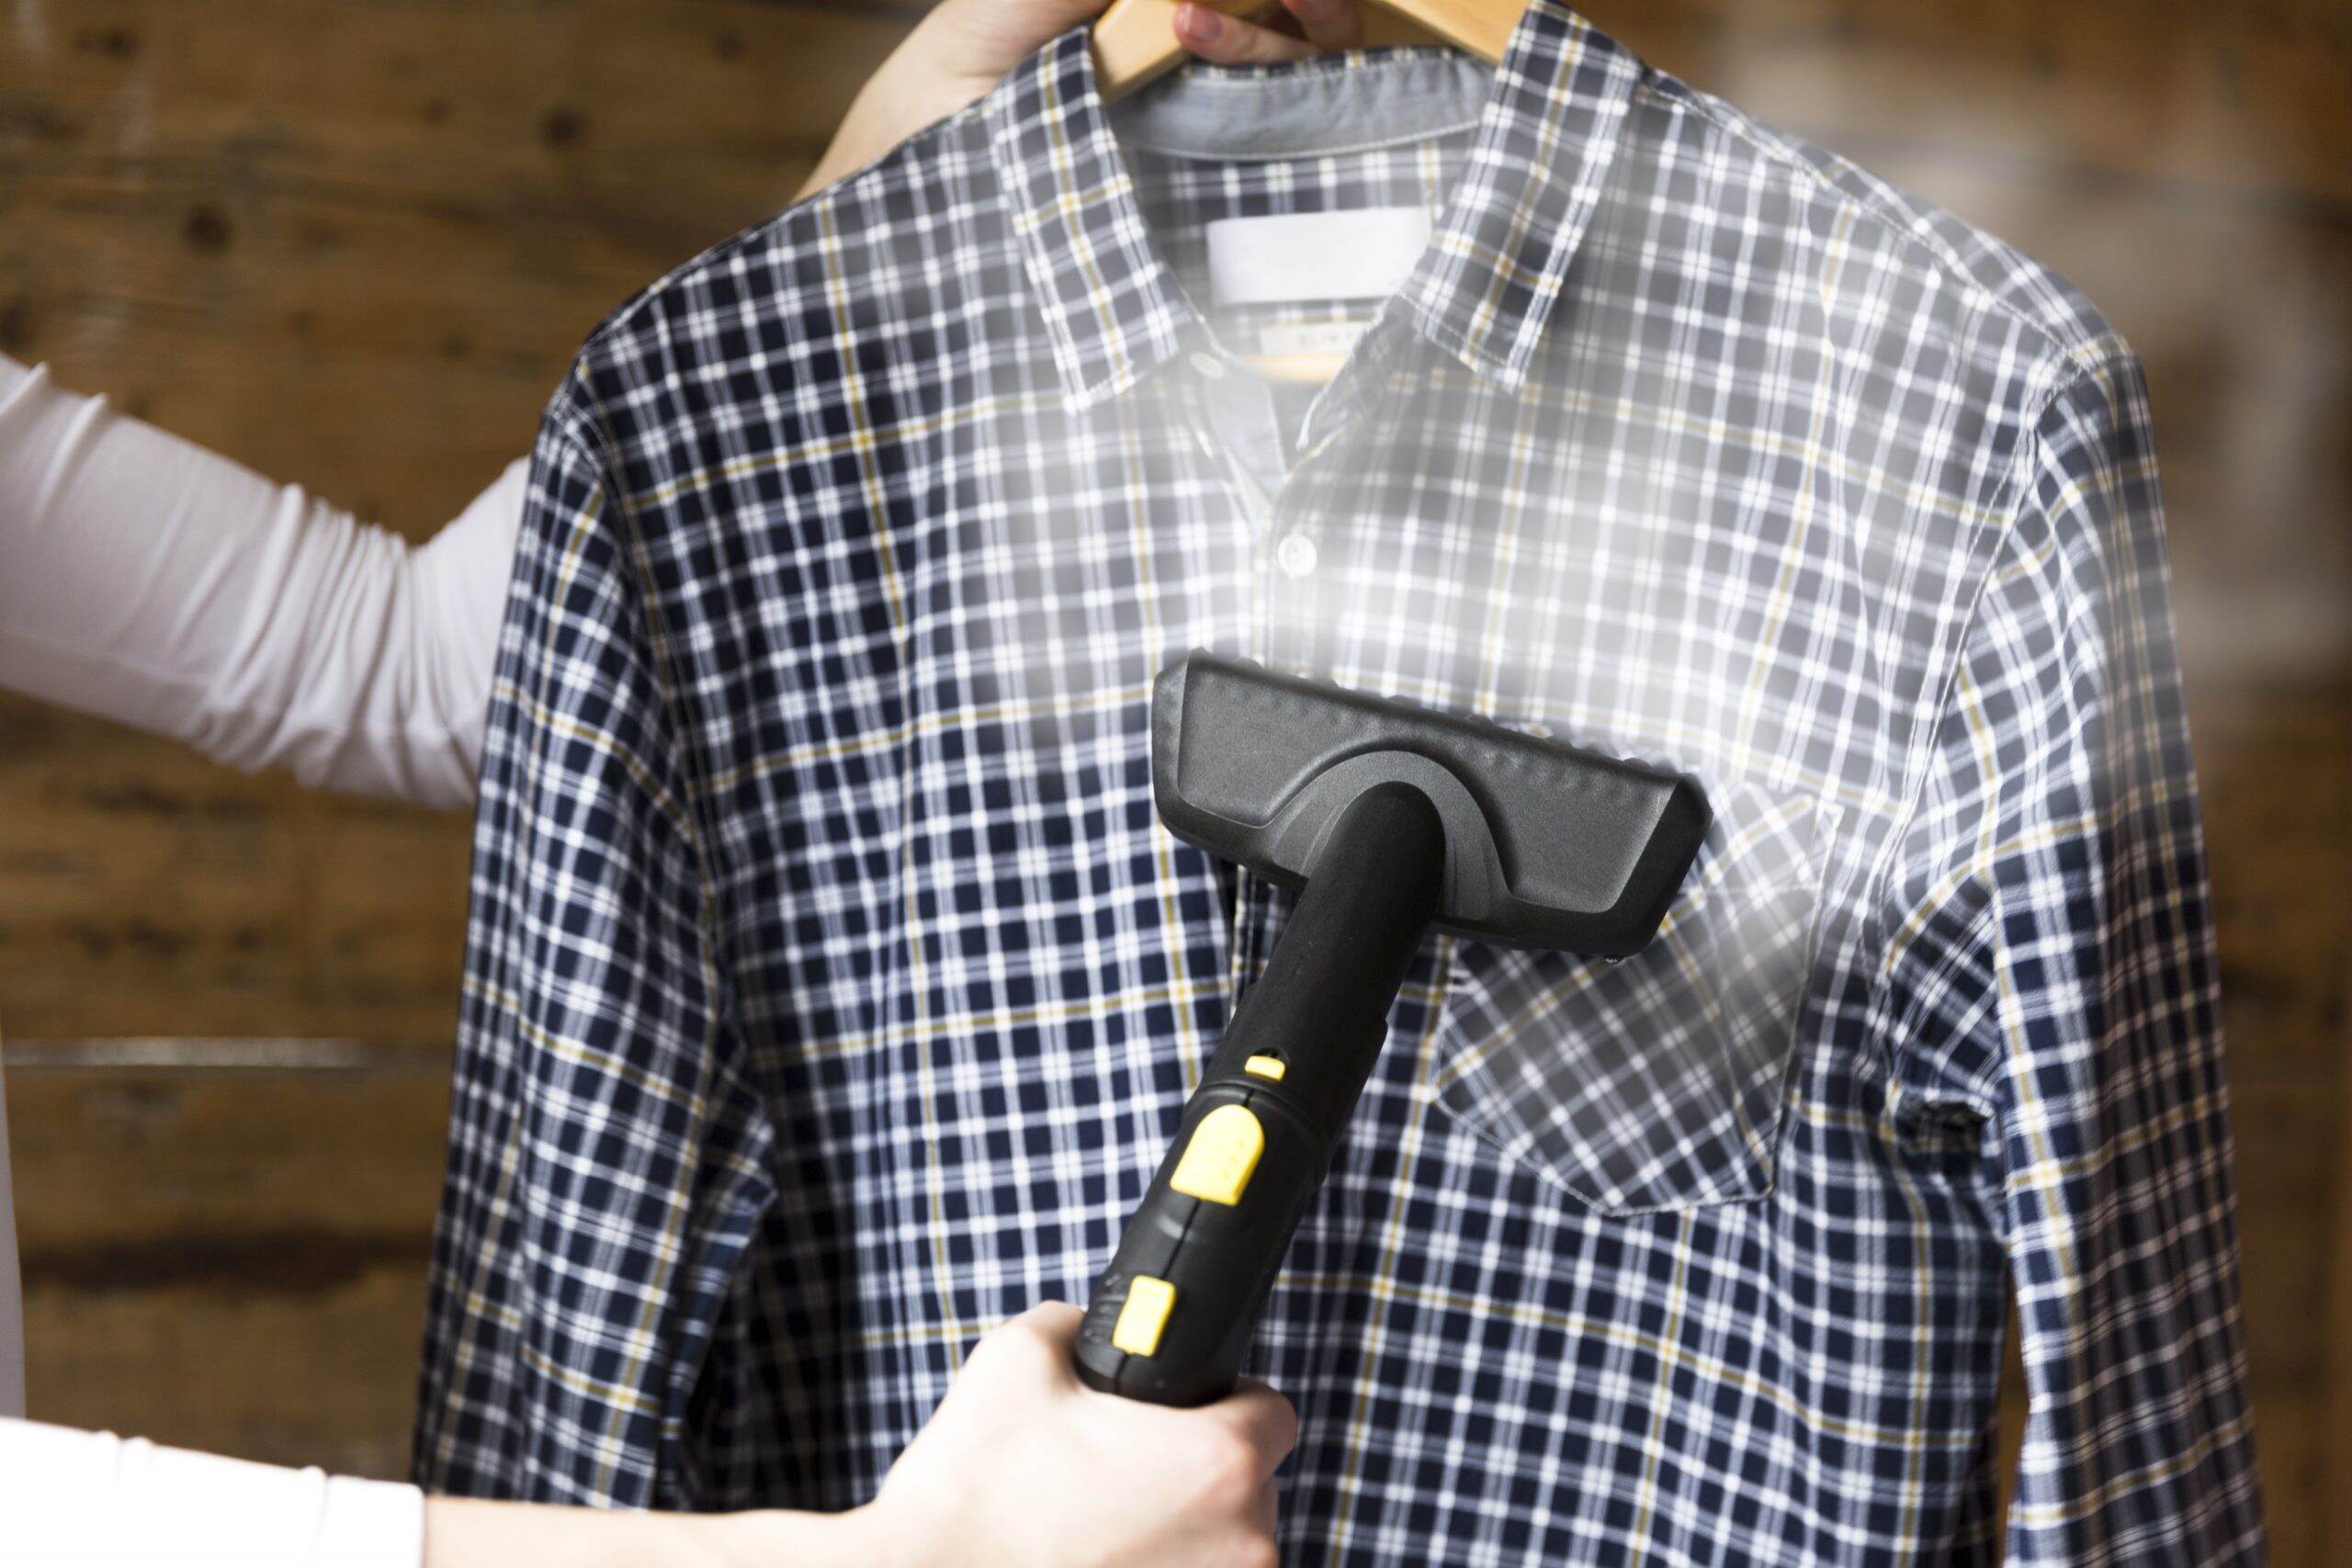 The Best Handheld Clothing Steamer Will Make All Your Wrinkles and Problems  Disappear